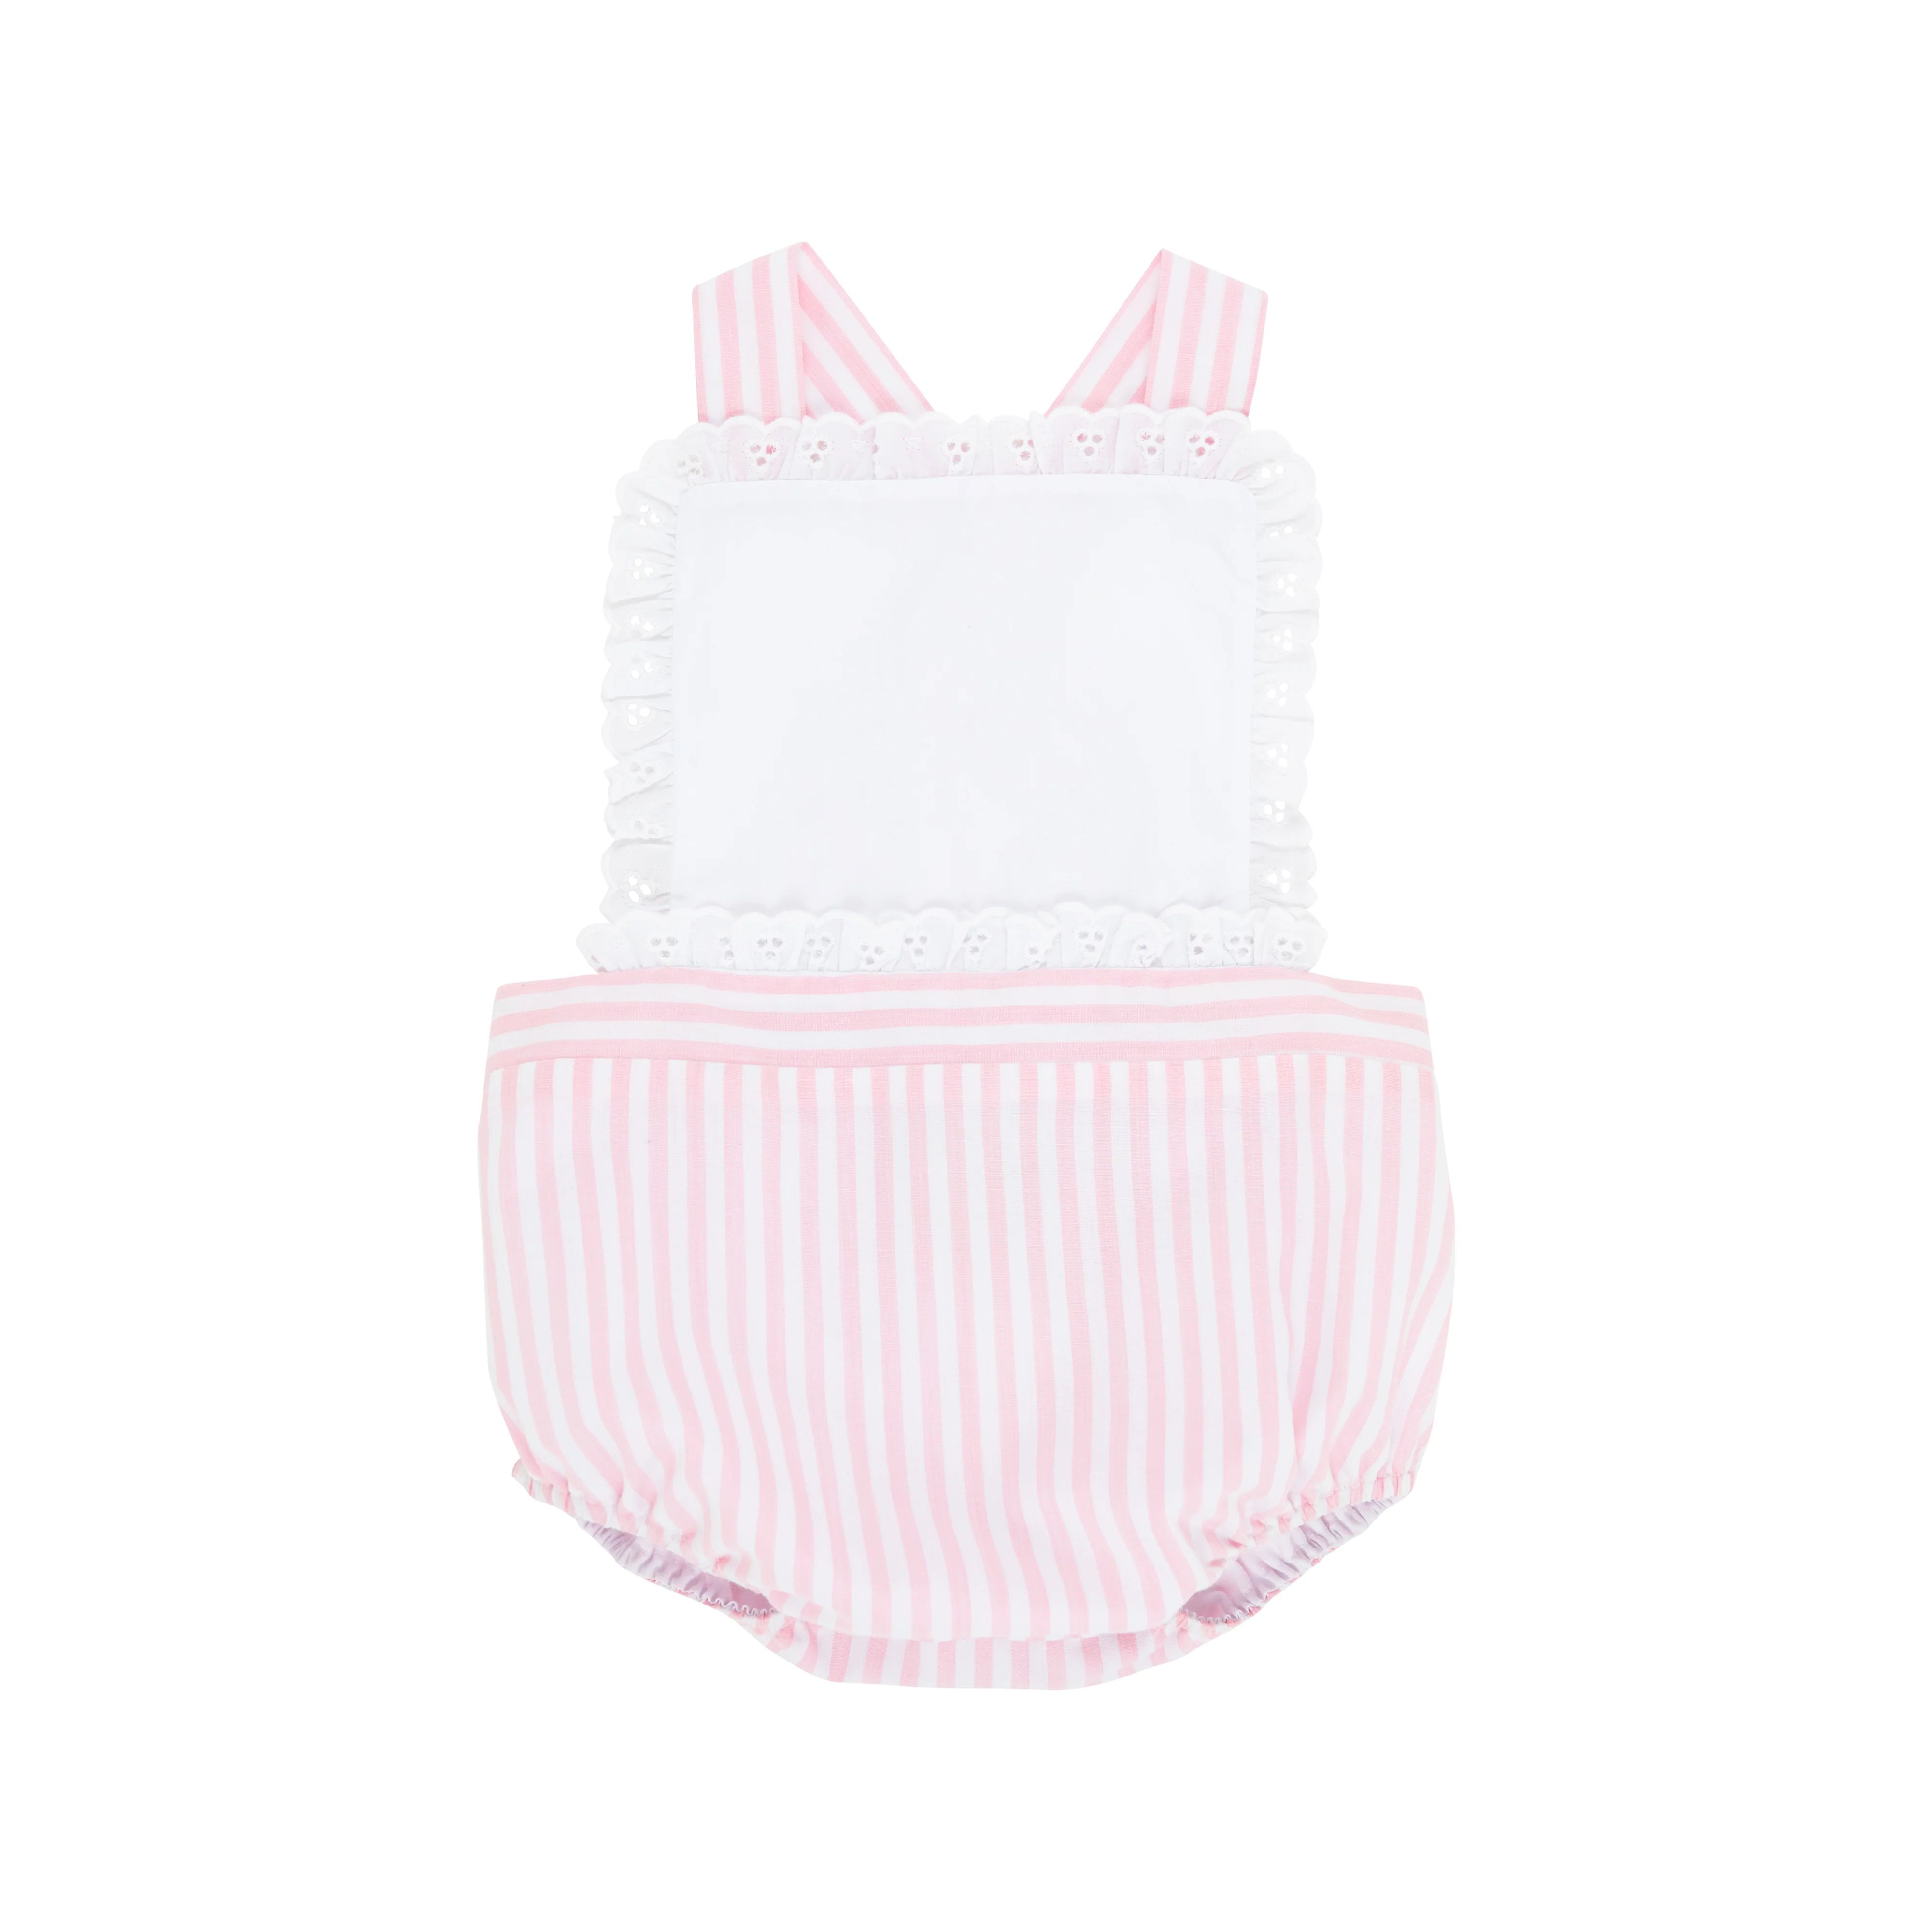 Sally Sunsuit - Worth Avenue White & Pinckney Pink Stripe with Worth Avenue White Eyelet | The Beaufort Bonnet Company